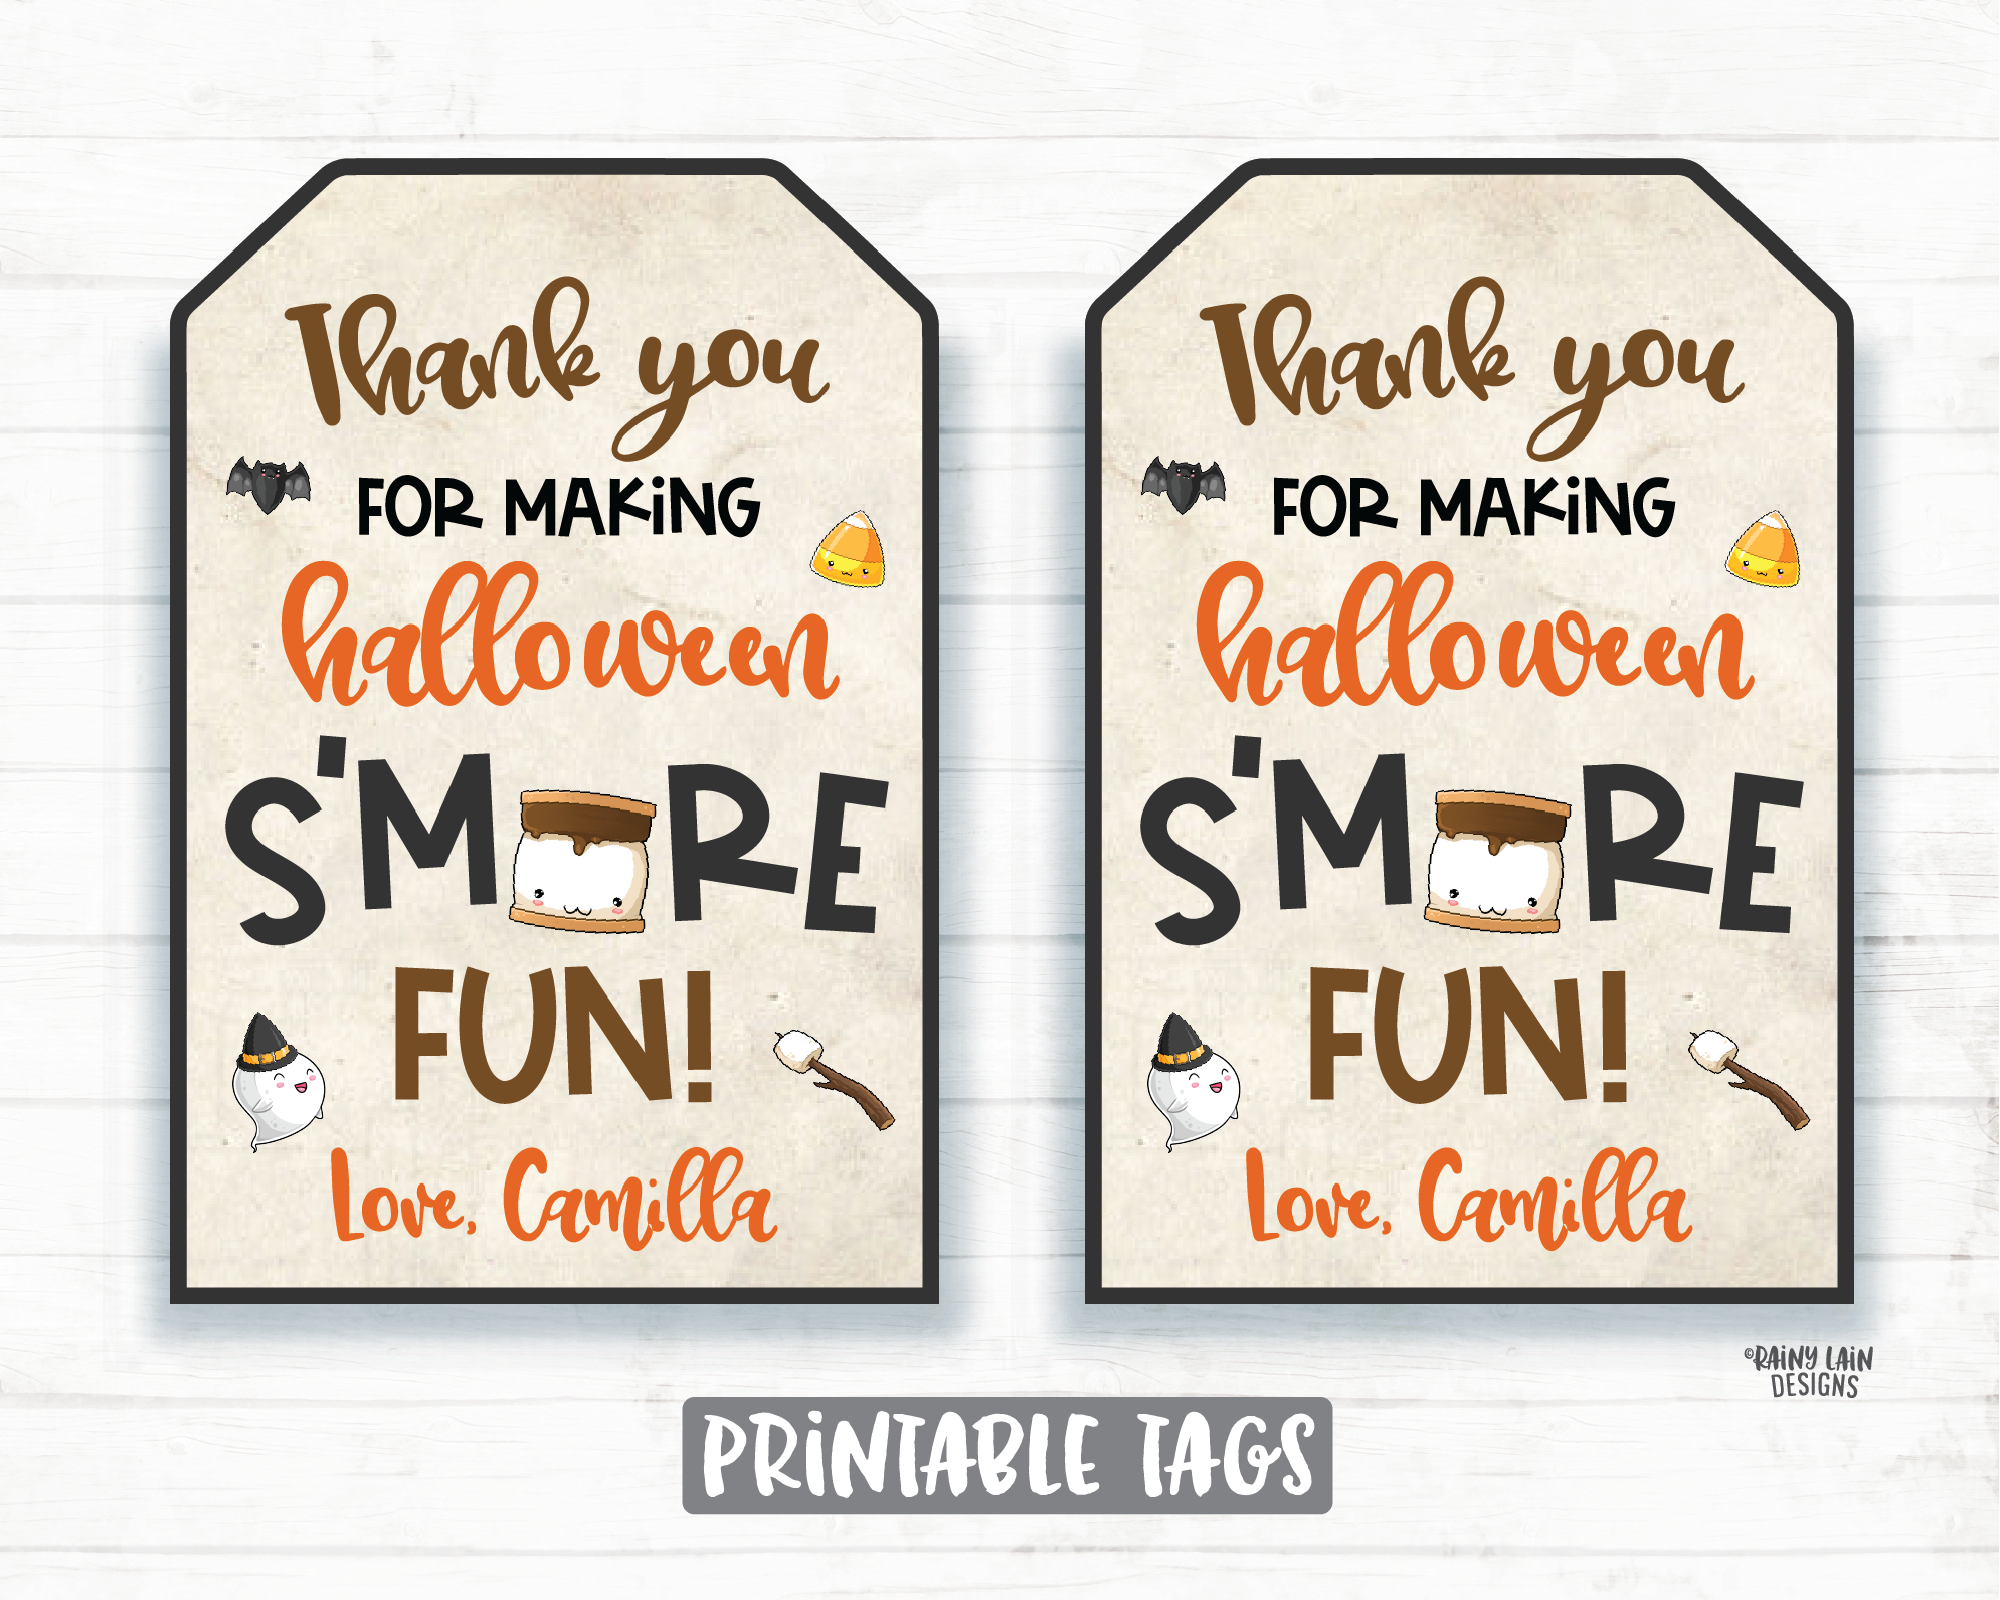 Halloween S'mores Tags S'mores Party Favor Tag S'mores Halloween Halloween party favor tag Thank you for making Halloween s'more fun Bonfire